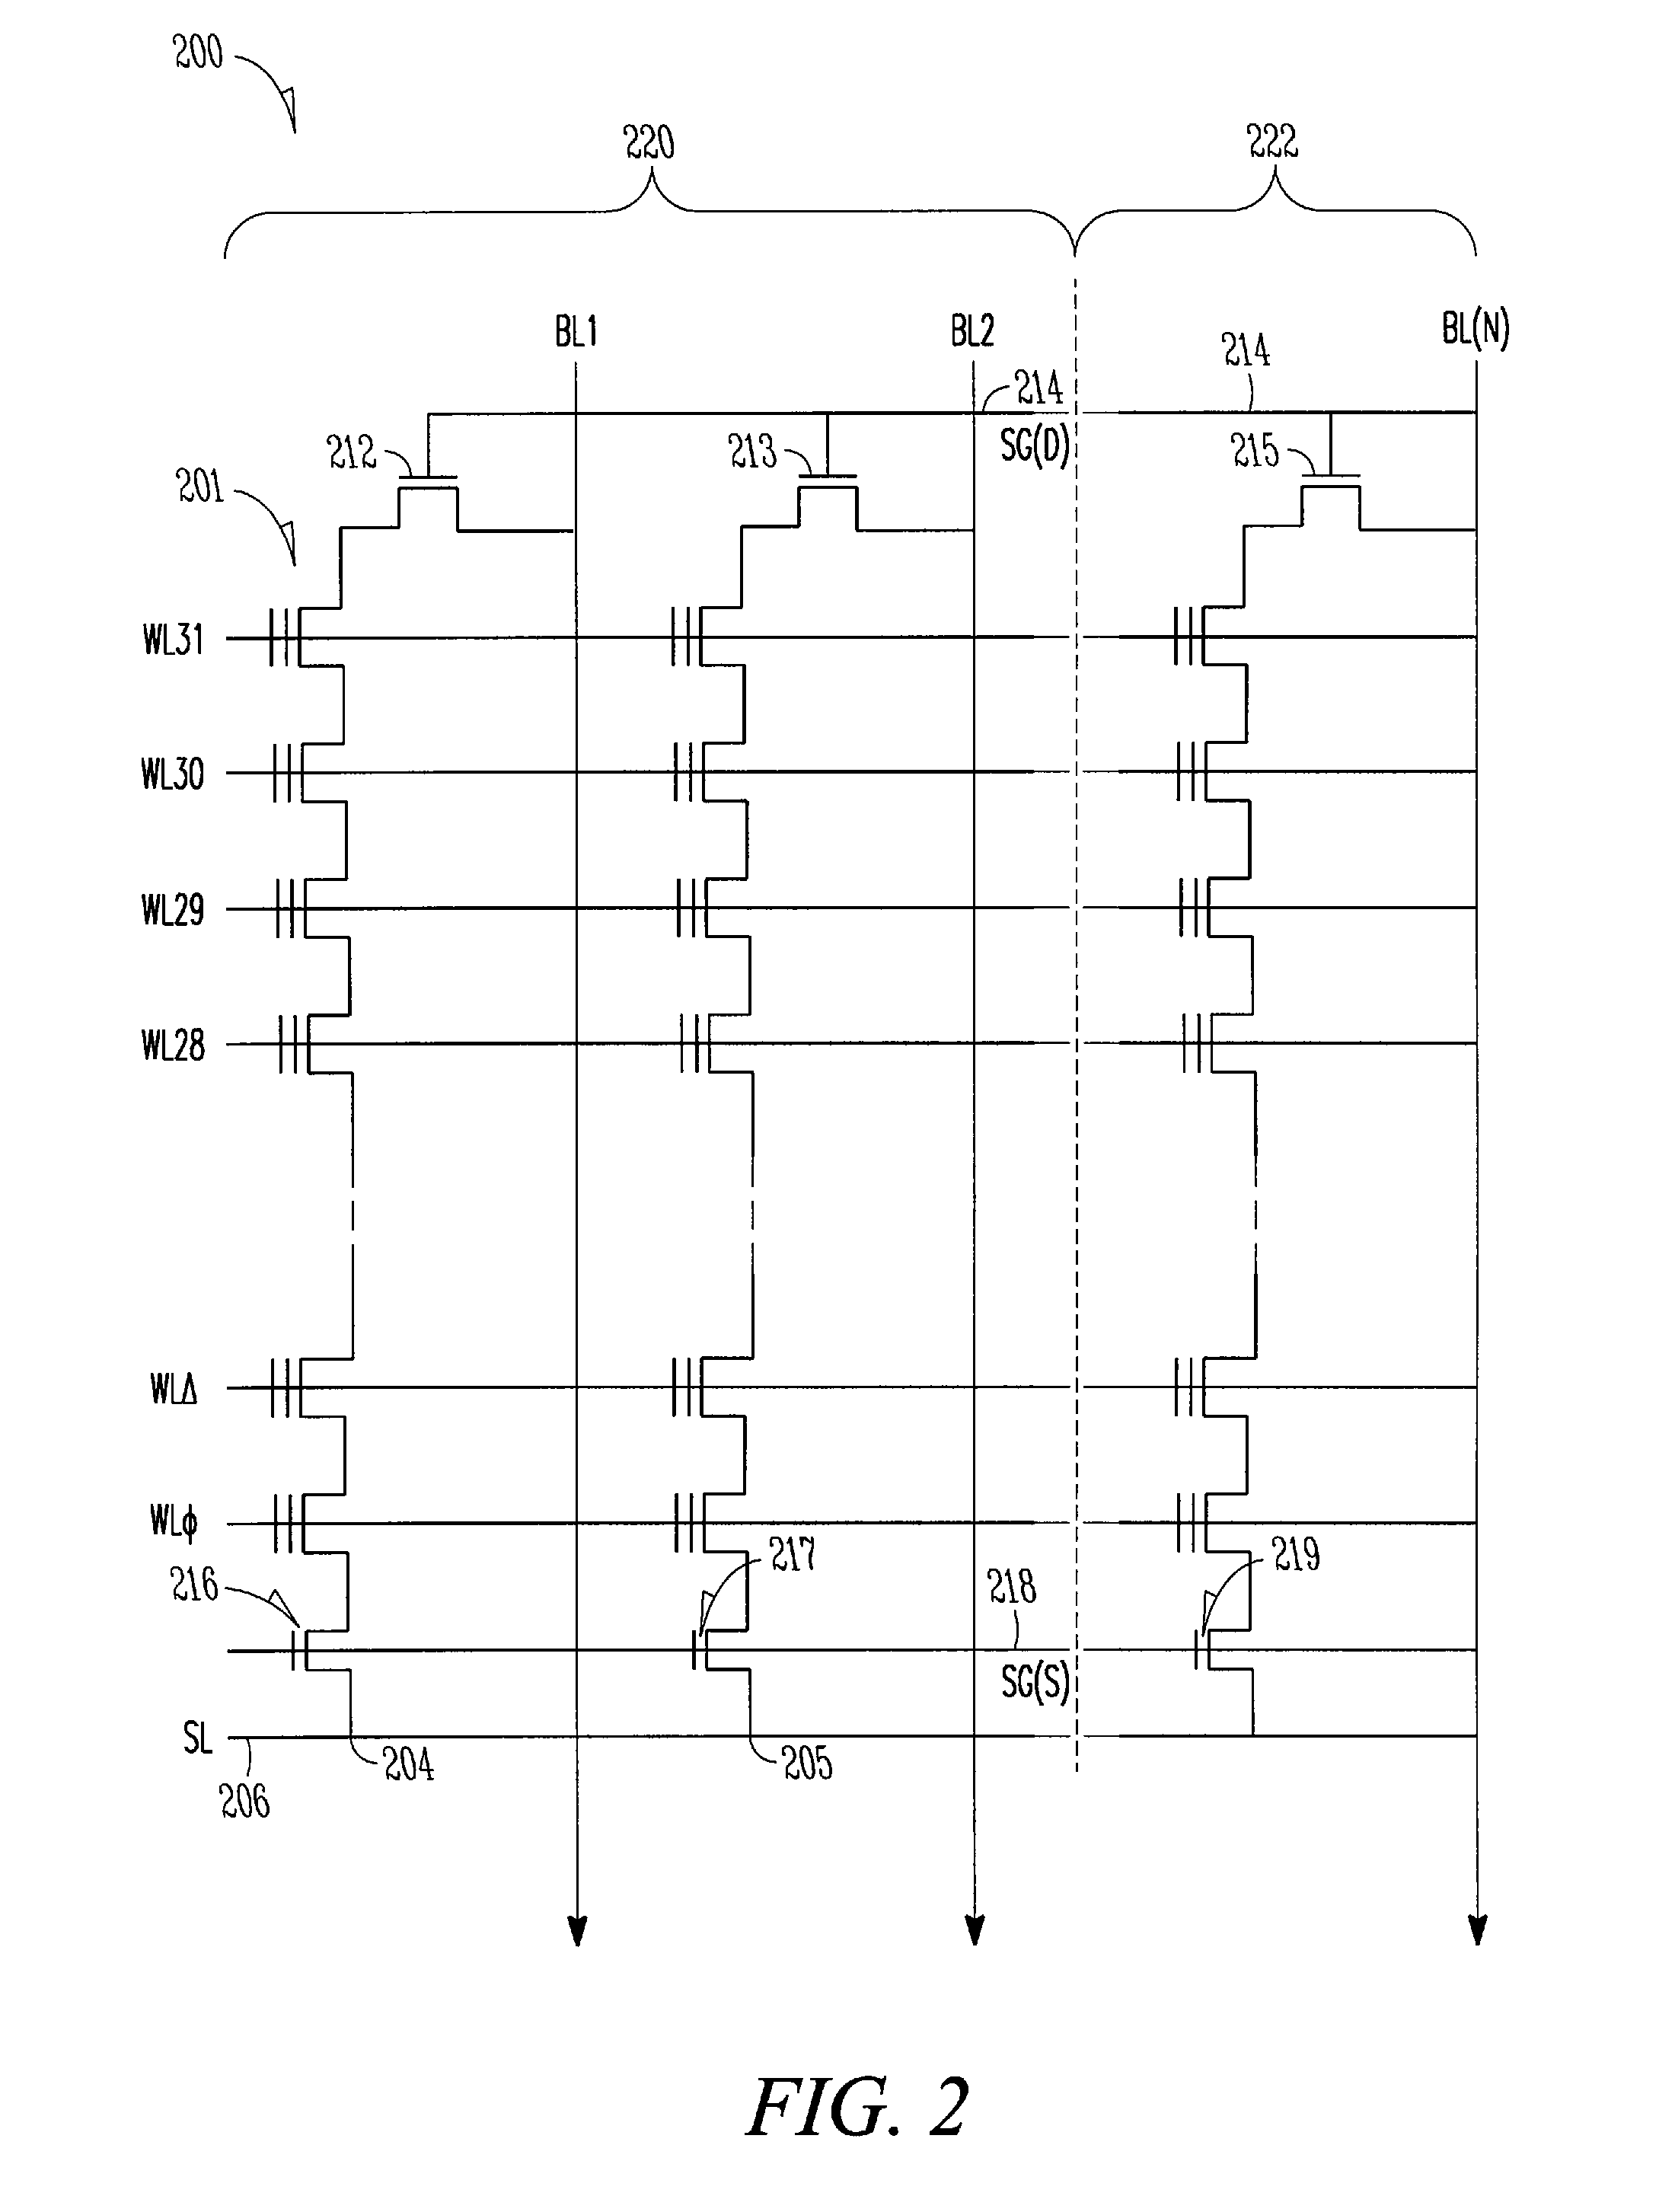 Apparatus, method, and system for flash memory